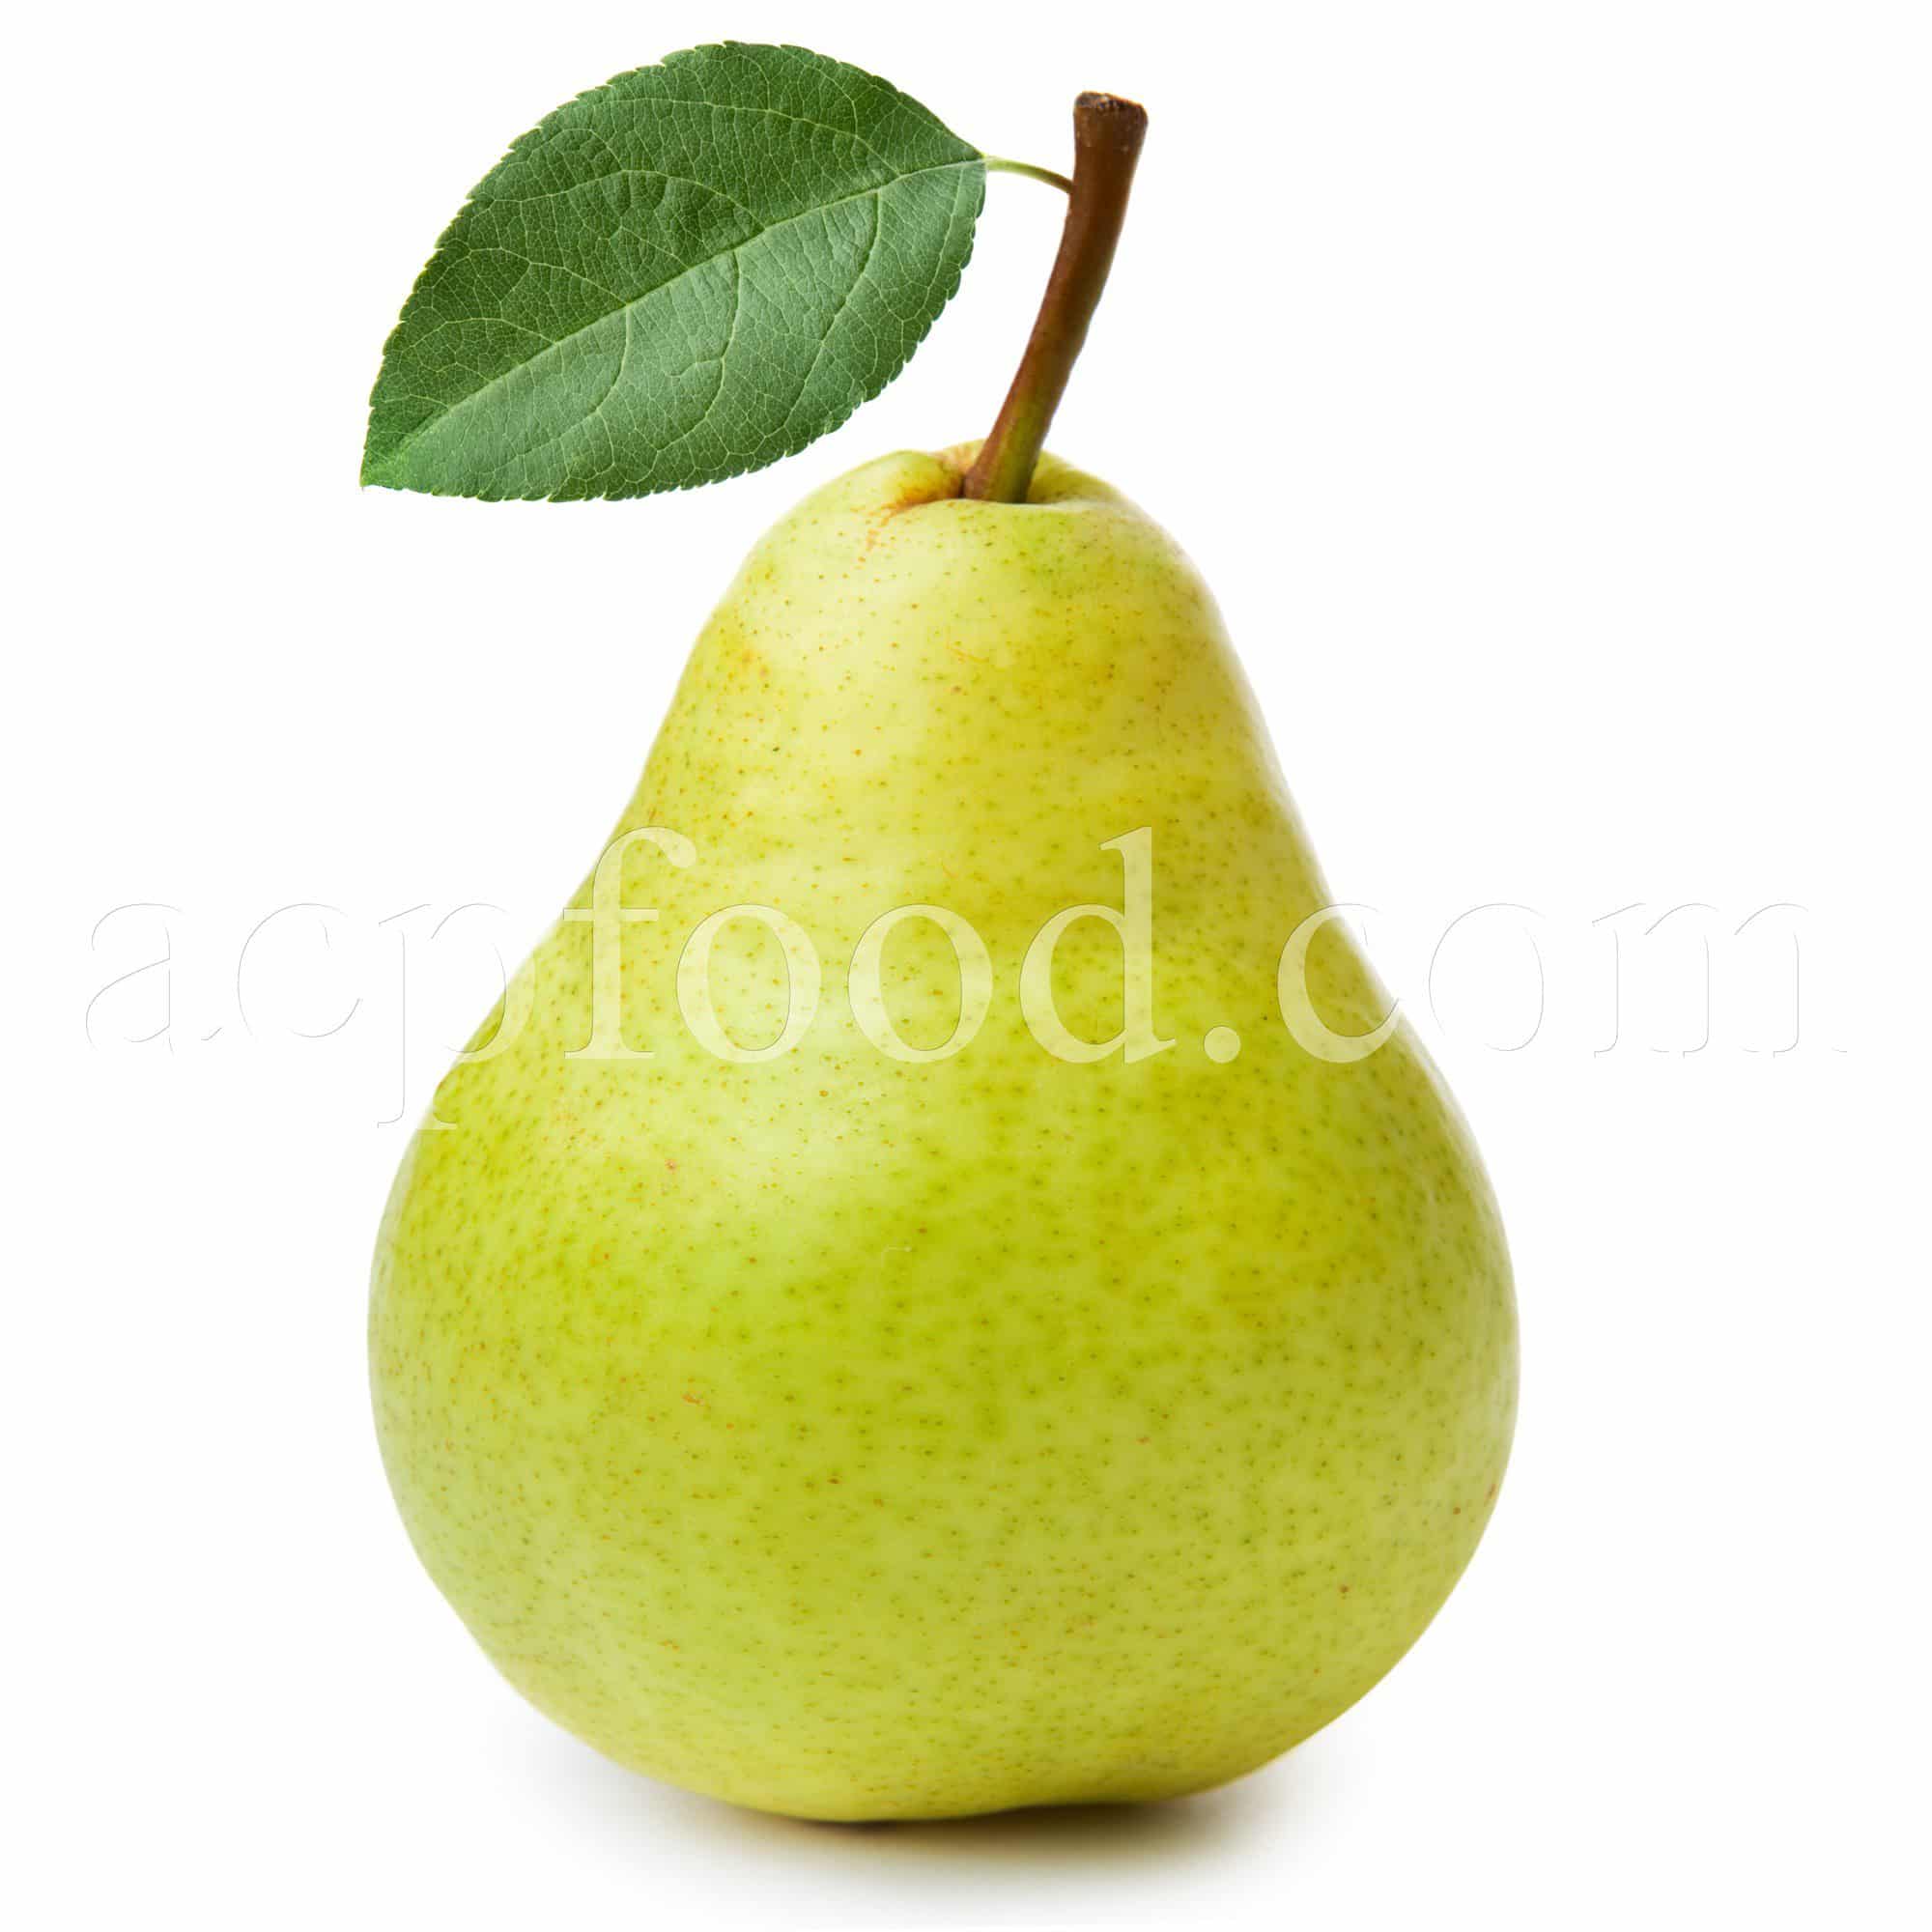 Herbs and fruits which can brighten you up. Pear